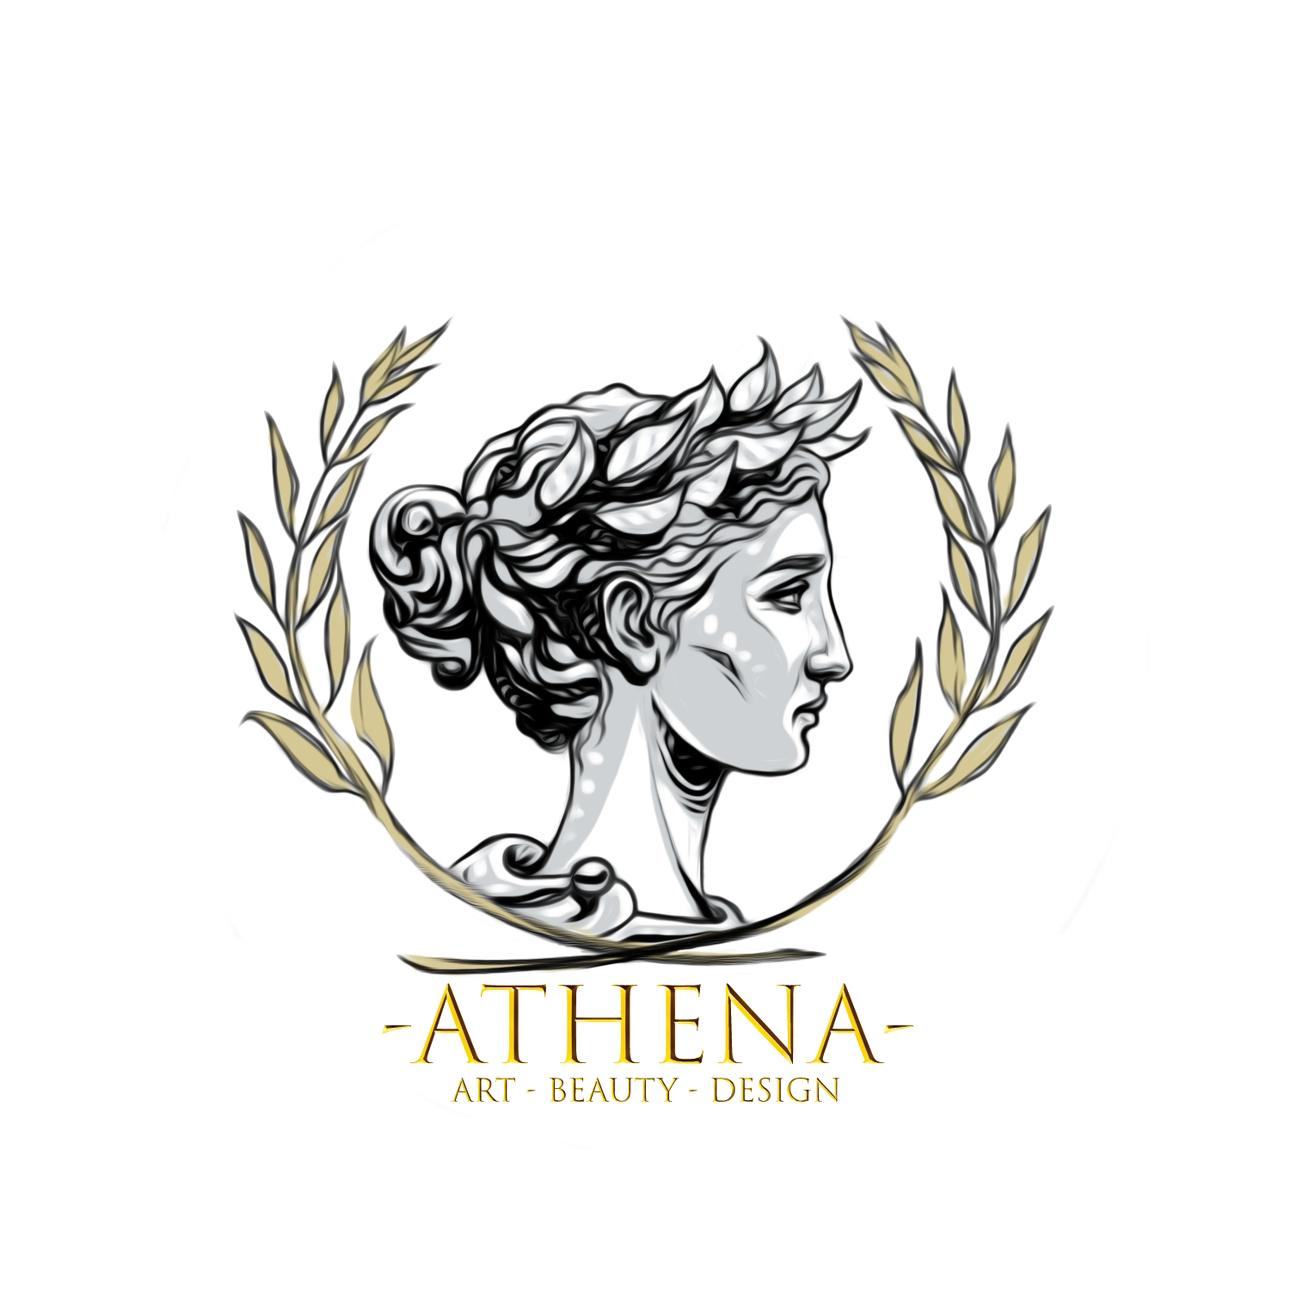 Athena candles 's images